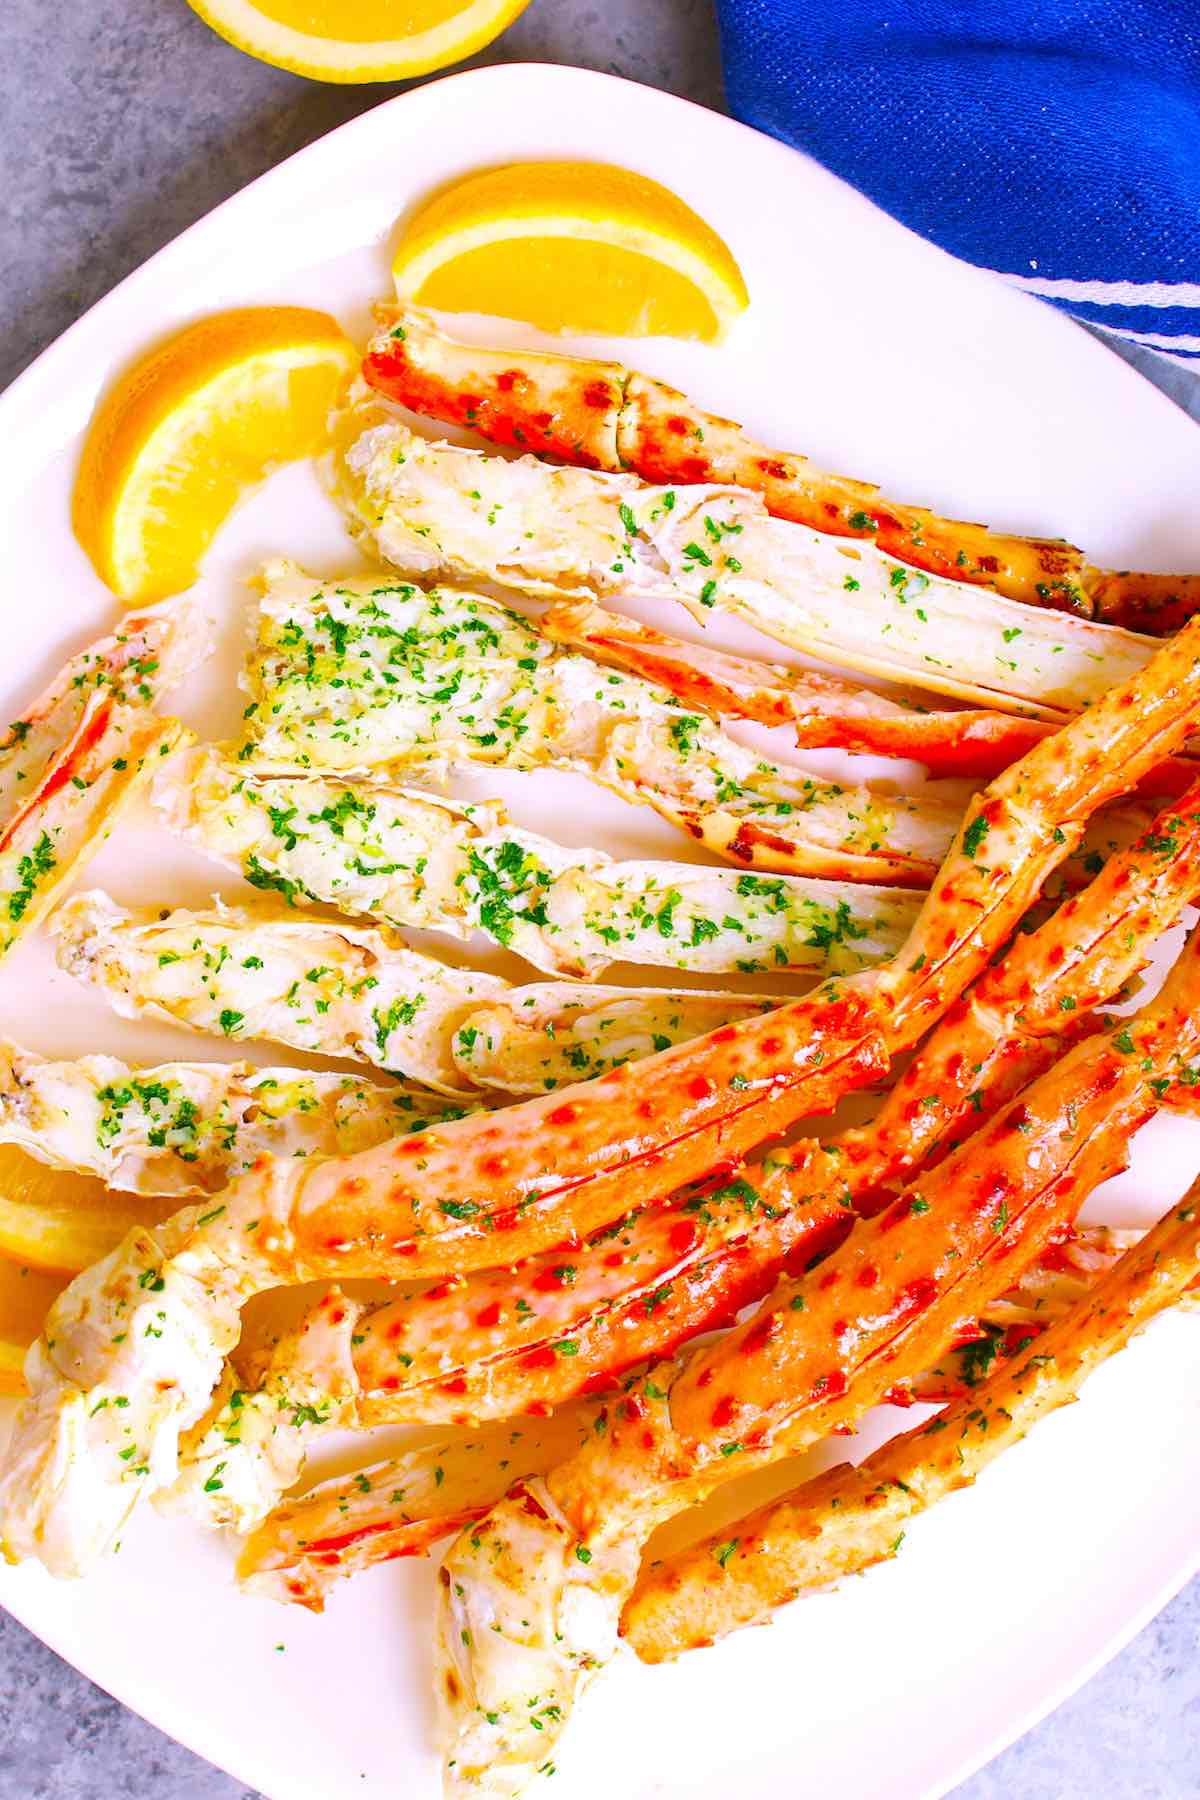 King crab legs served on a white plate with lemon wedges.